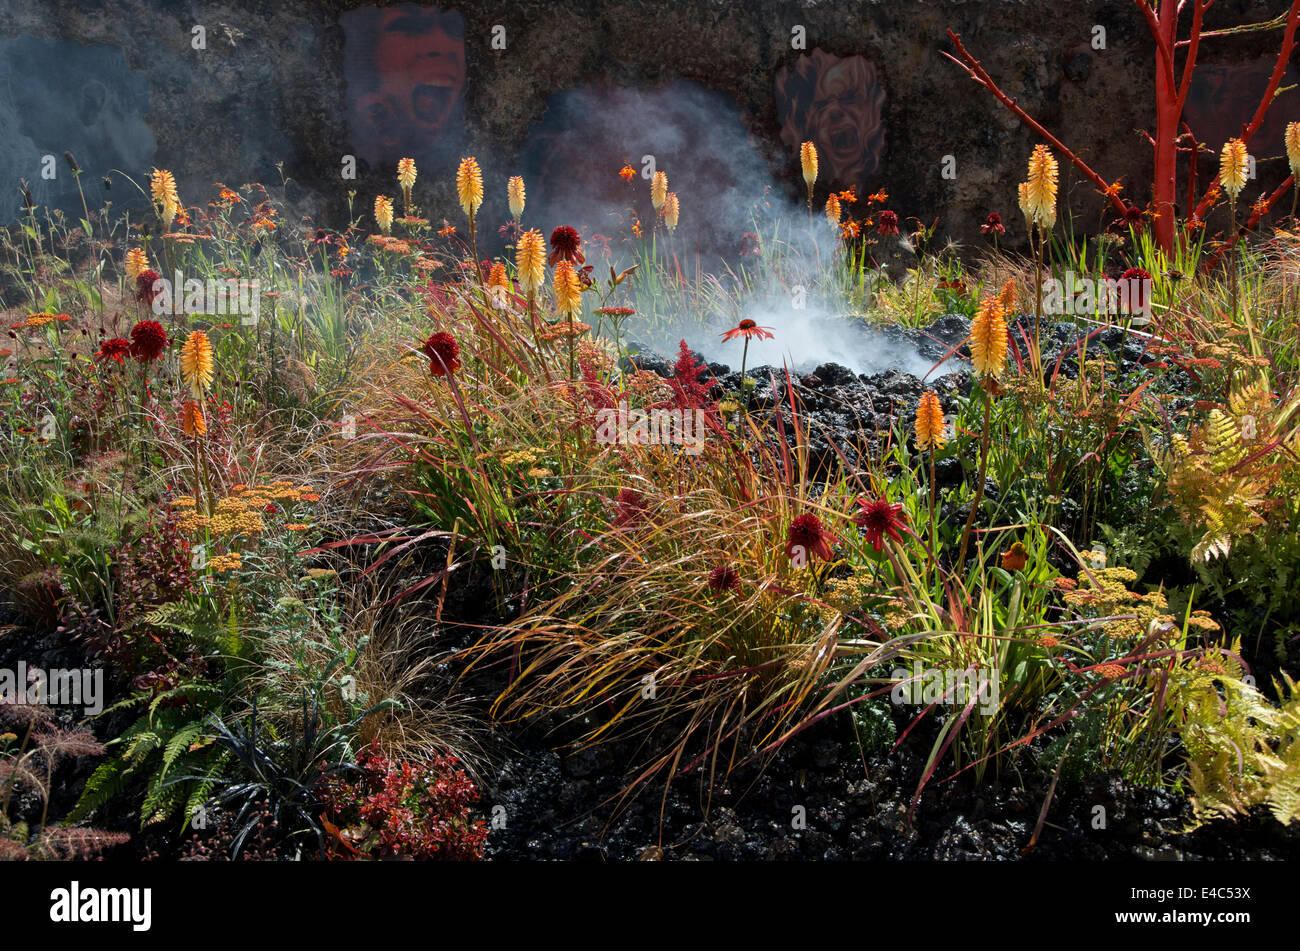 Gold medal winning Conceptual Garden,  Wrath - Eruption of Unhealed Anger designed by Nilufer Danis. The garden is inspired by volcanoes and their analogy to explosions of anger. Stock Photo